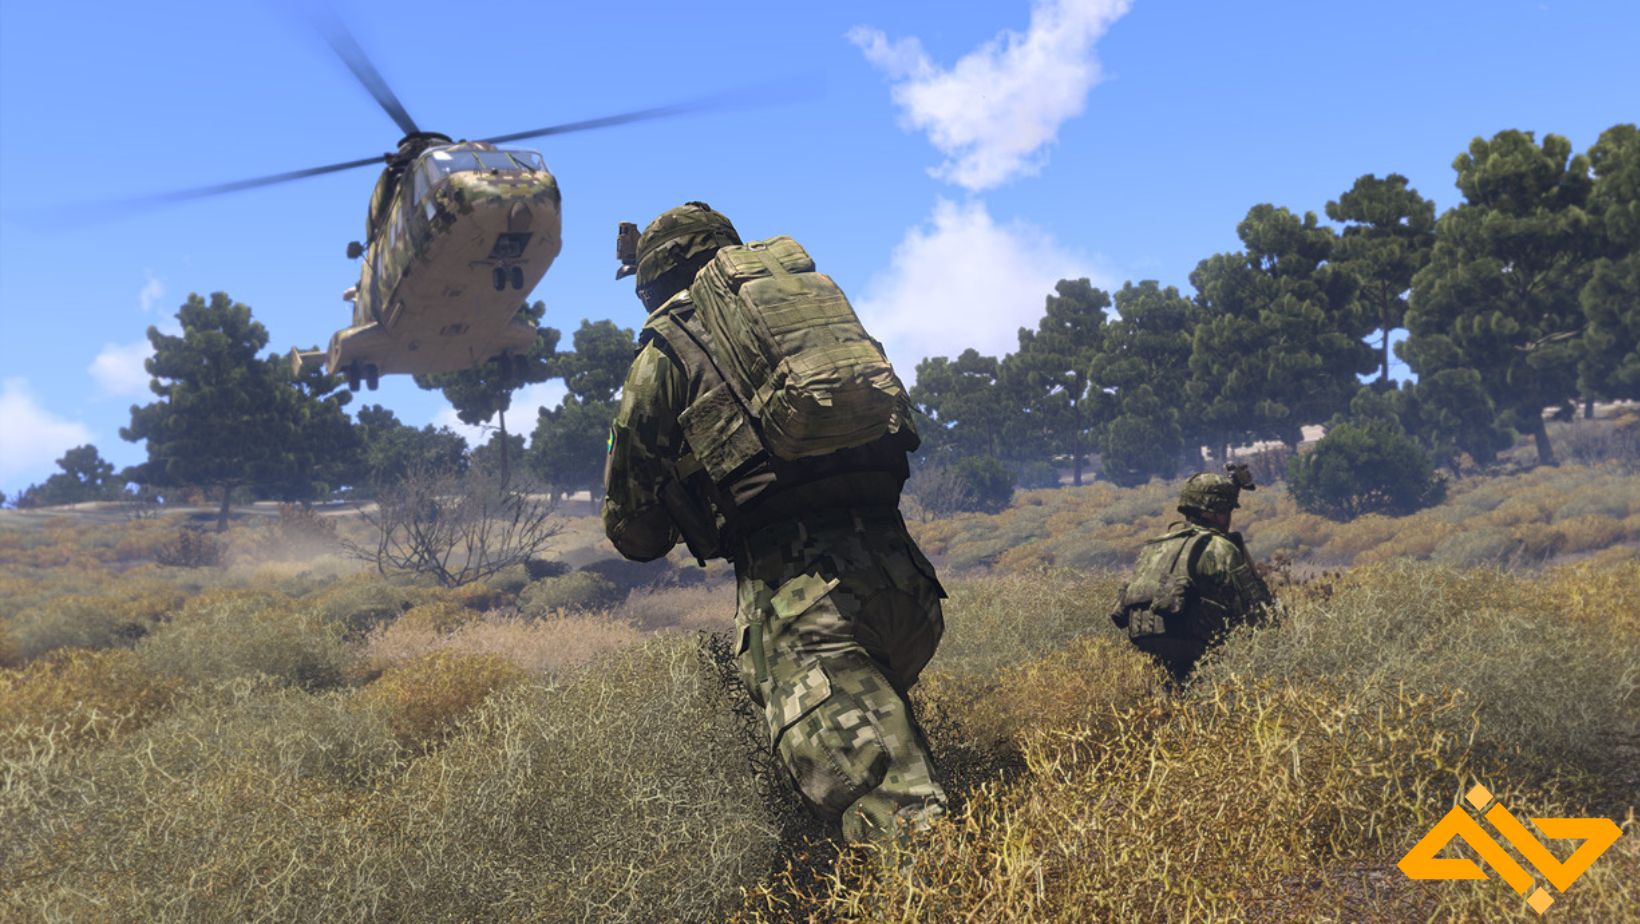 Arma 3 is a war simulation first-person sniping game and likes to keep things realistic. 